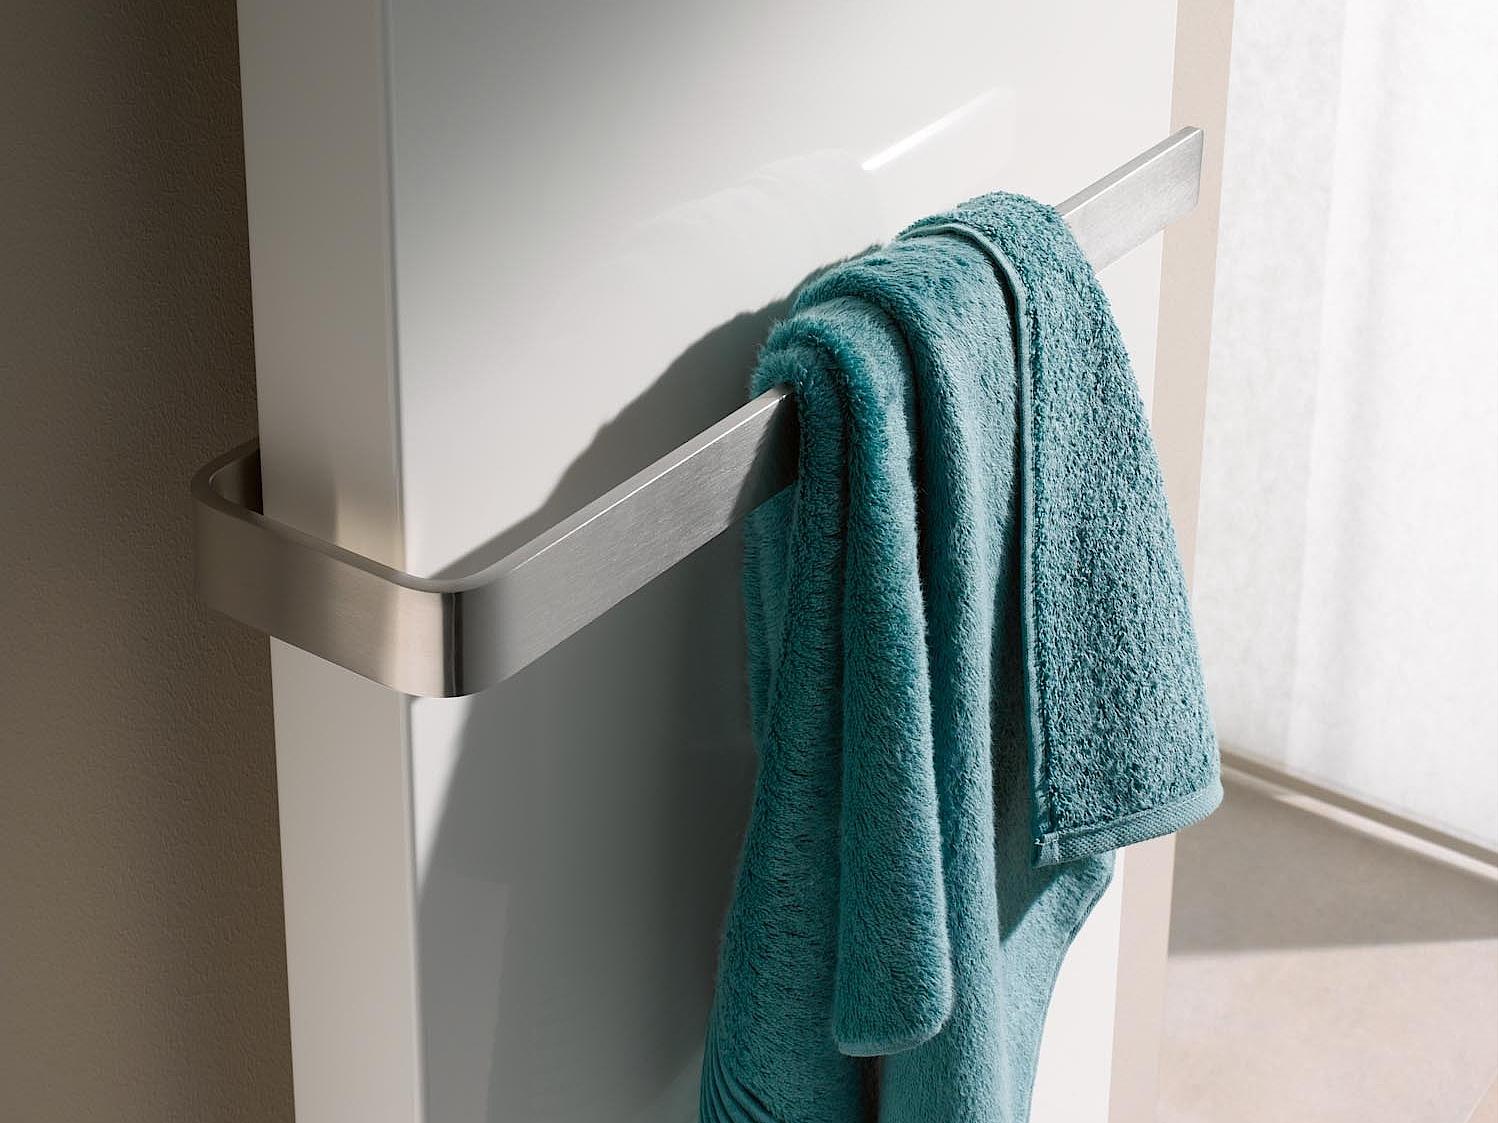 The Kermi Rubeo design and bathroom radiator allows the stainless steel towel rail to be installed at any height.